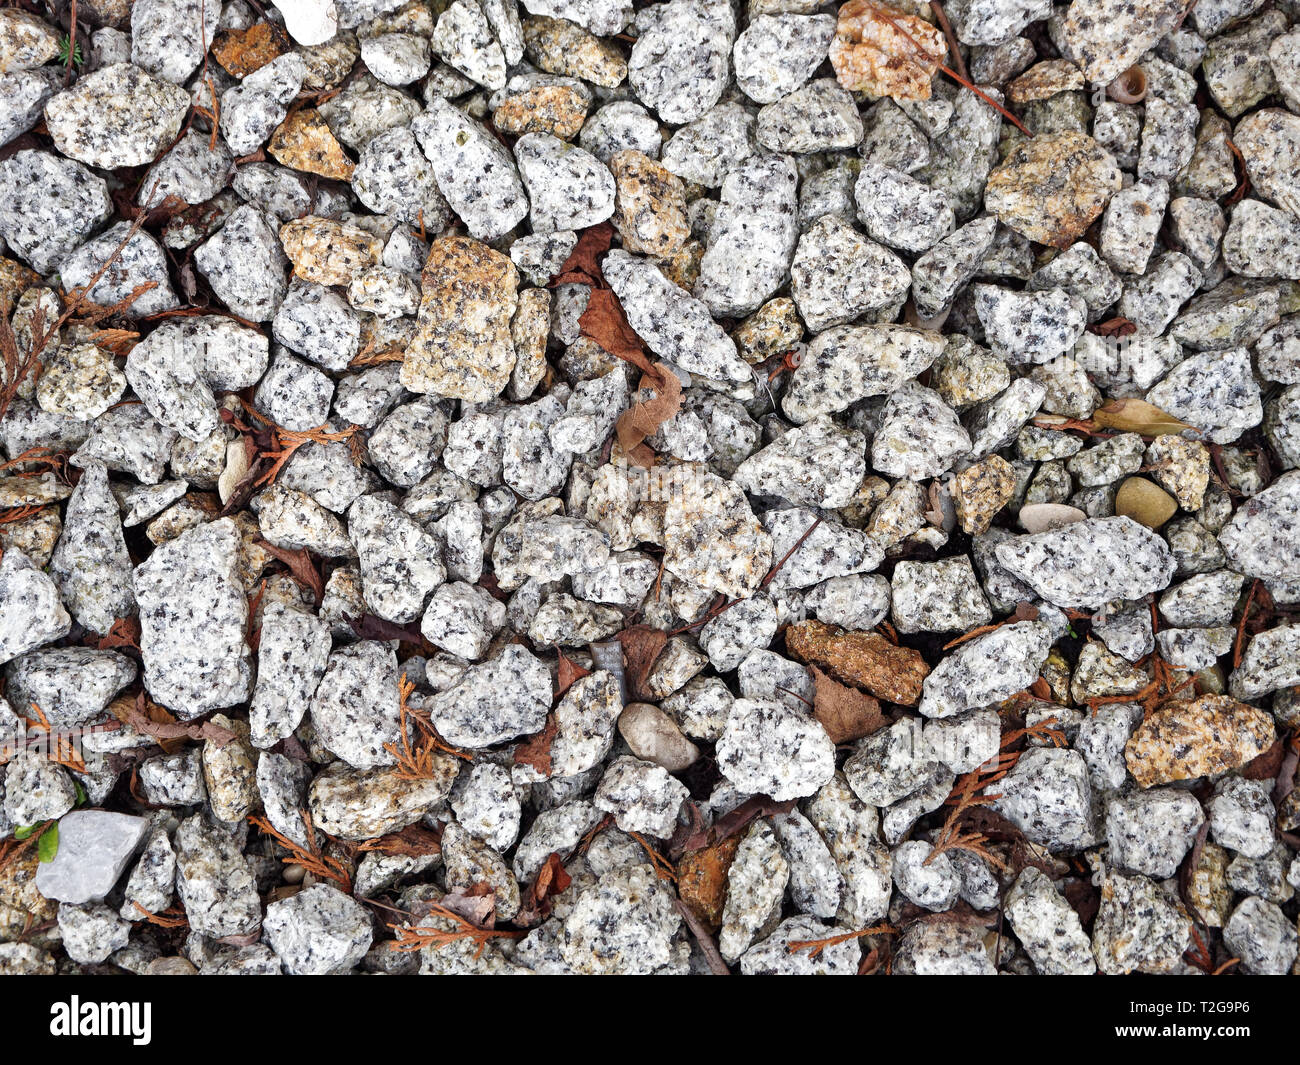 Gray and white granite stones with pieces of leaves in between Stock Photo